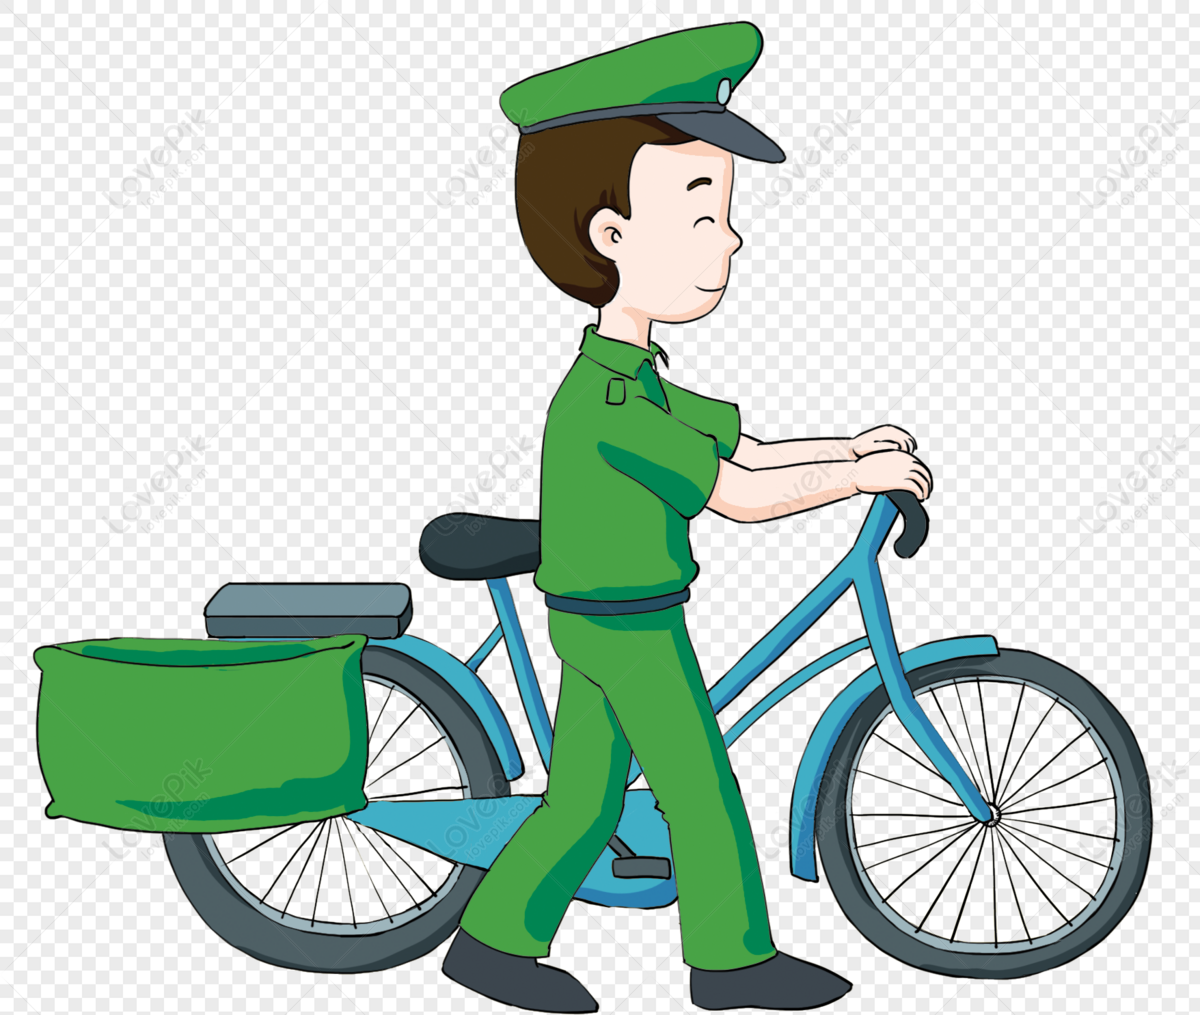 Green Post Office Mailman PNG Image And Clipart Image For Free Download -  Lovepik | 400646068